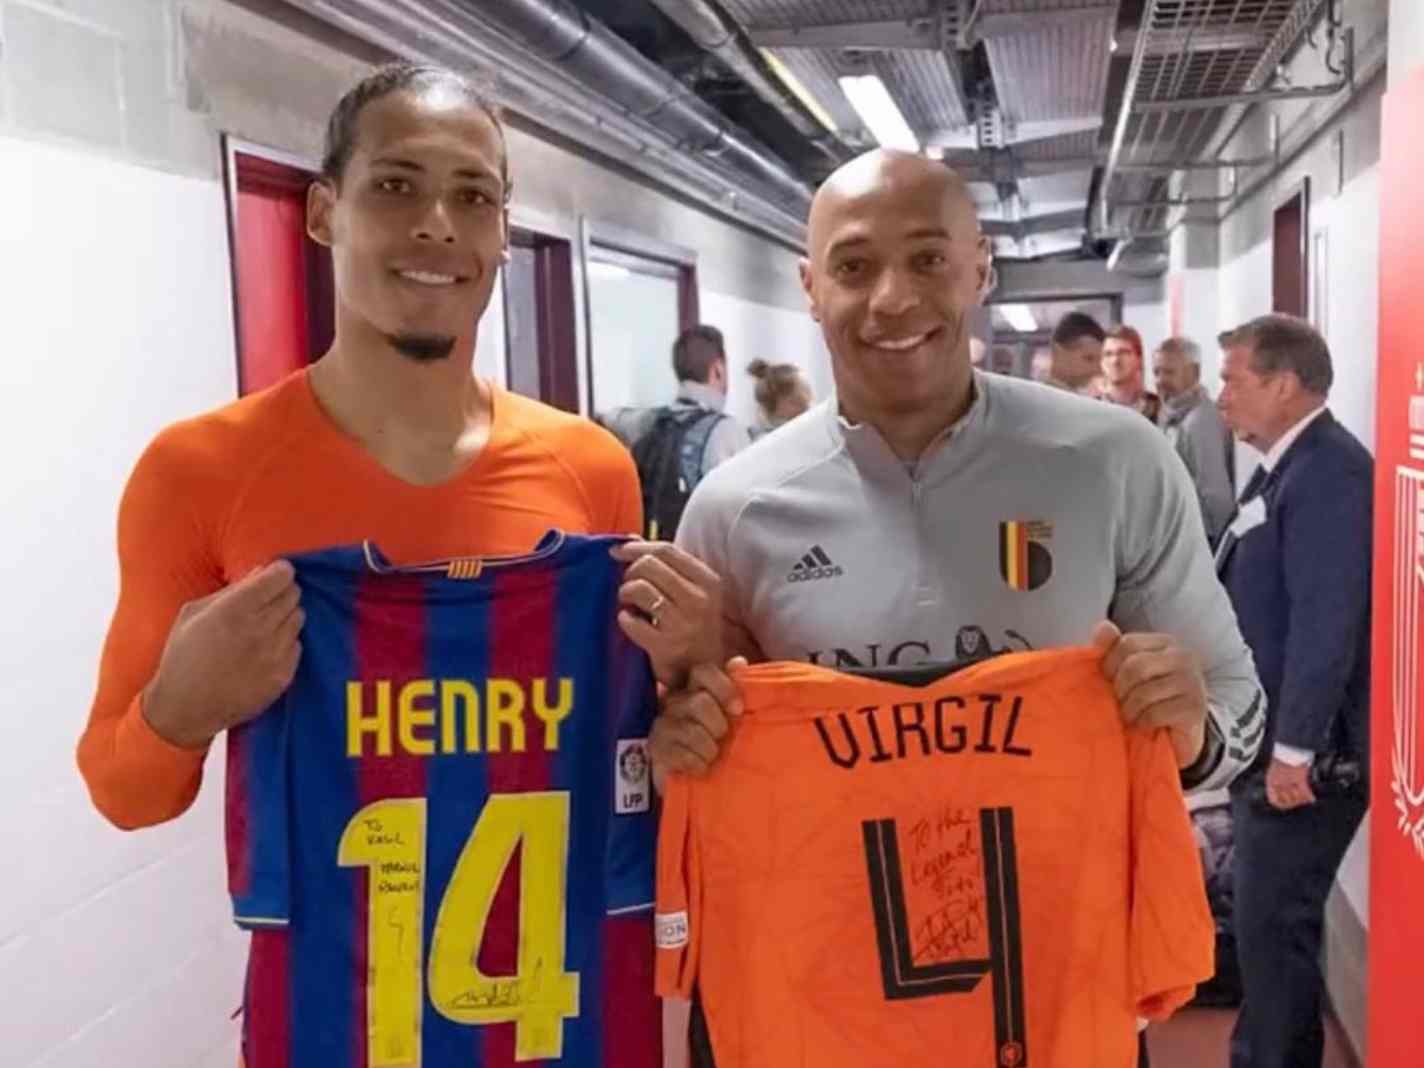 Virgil van Dijk exchanging shirts with Thierry Henry was truly special moment.